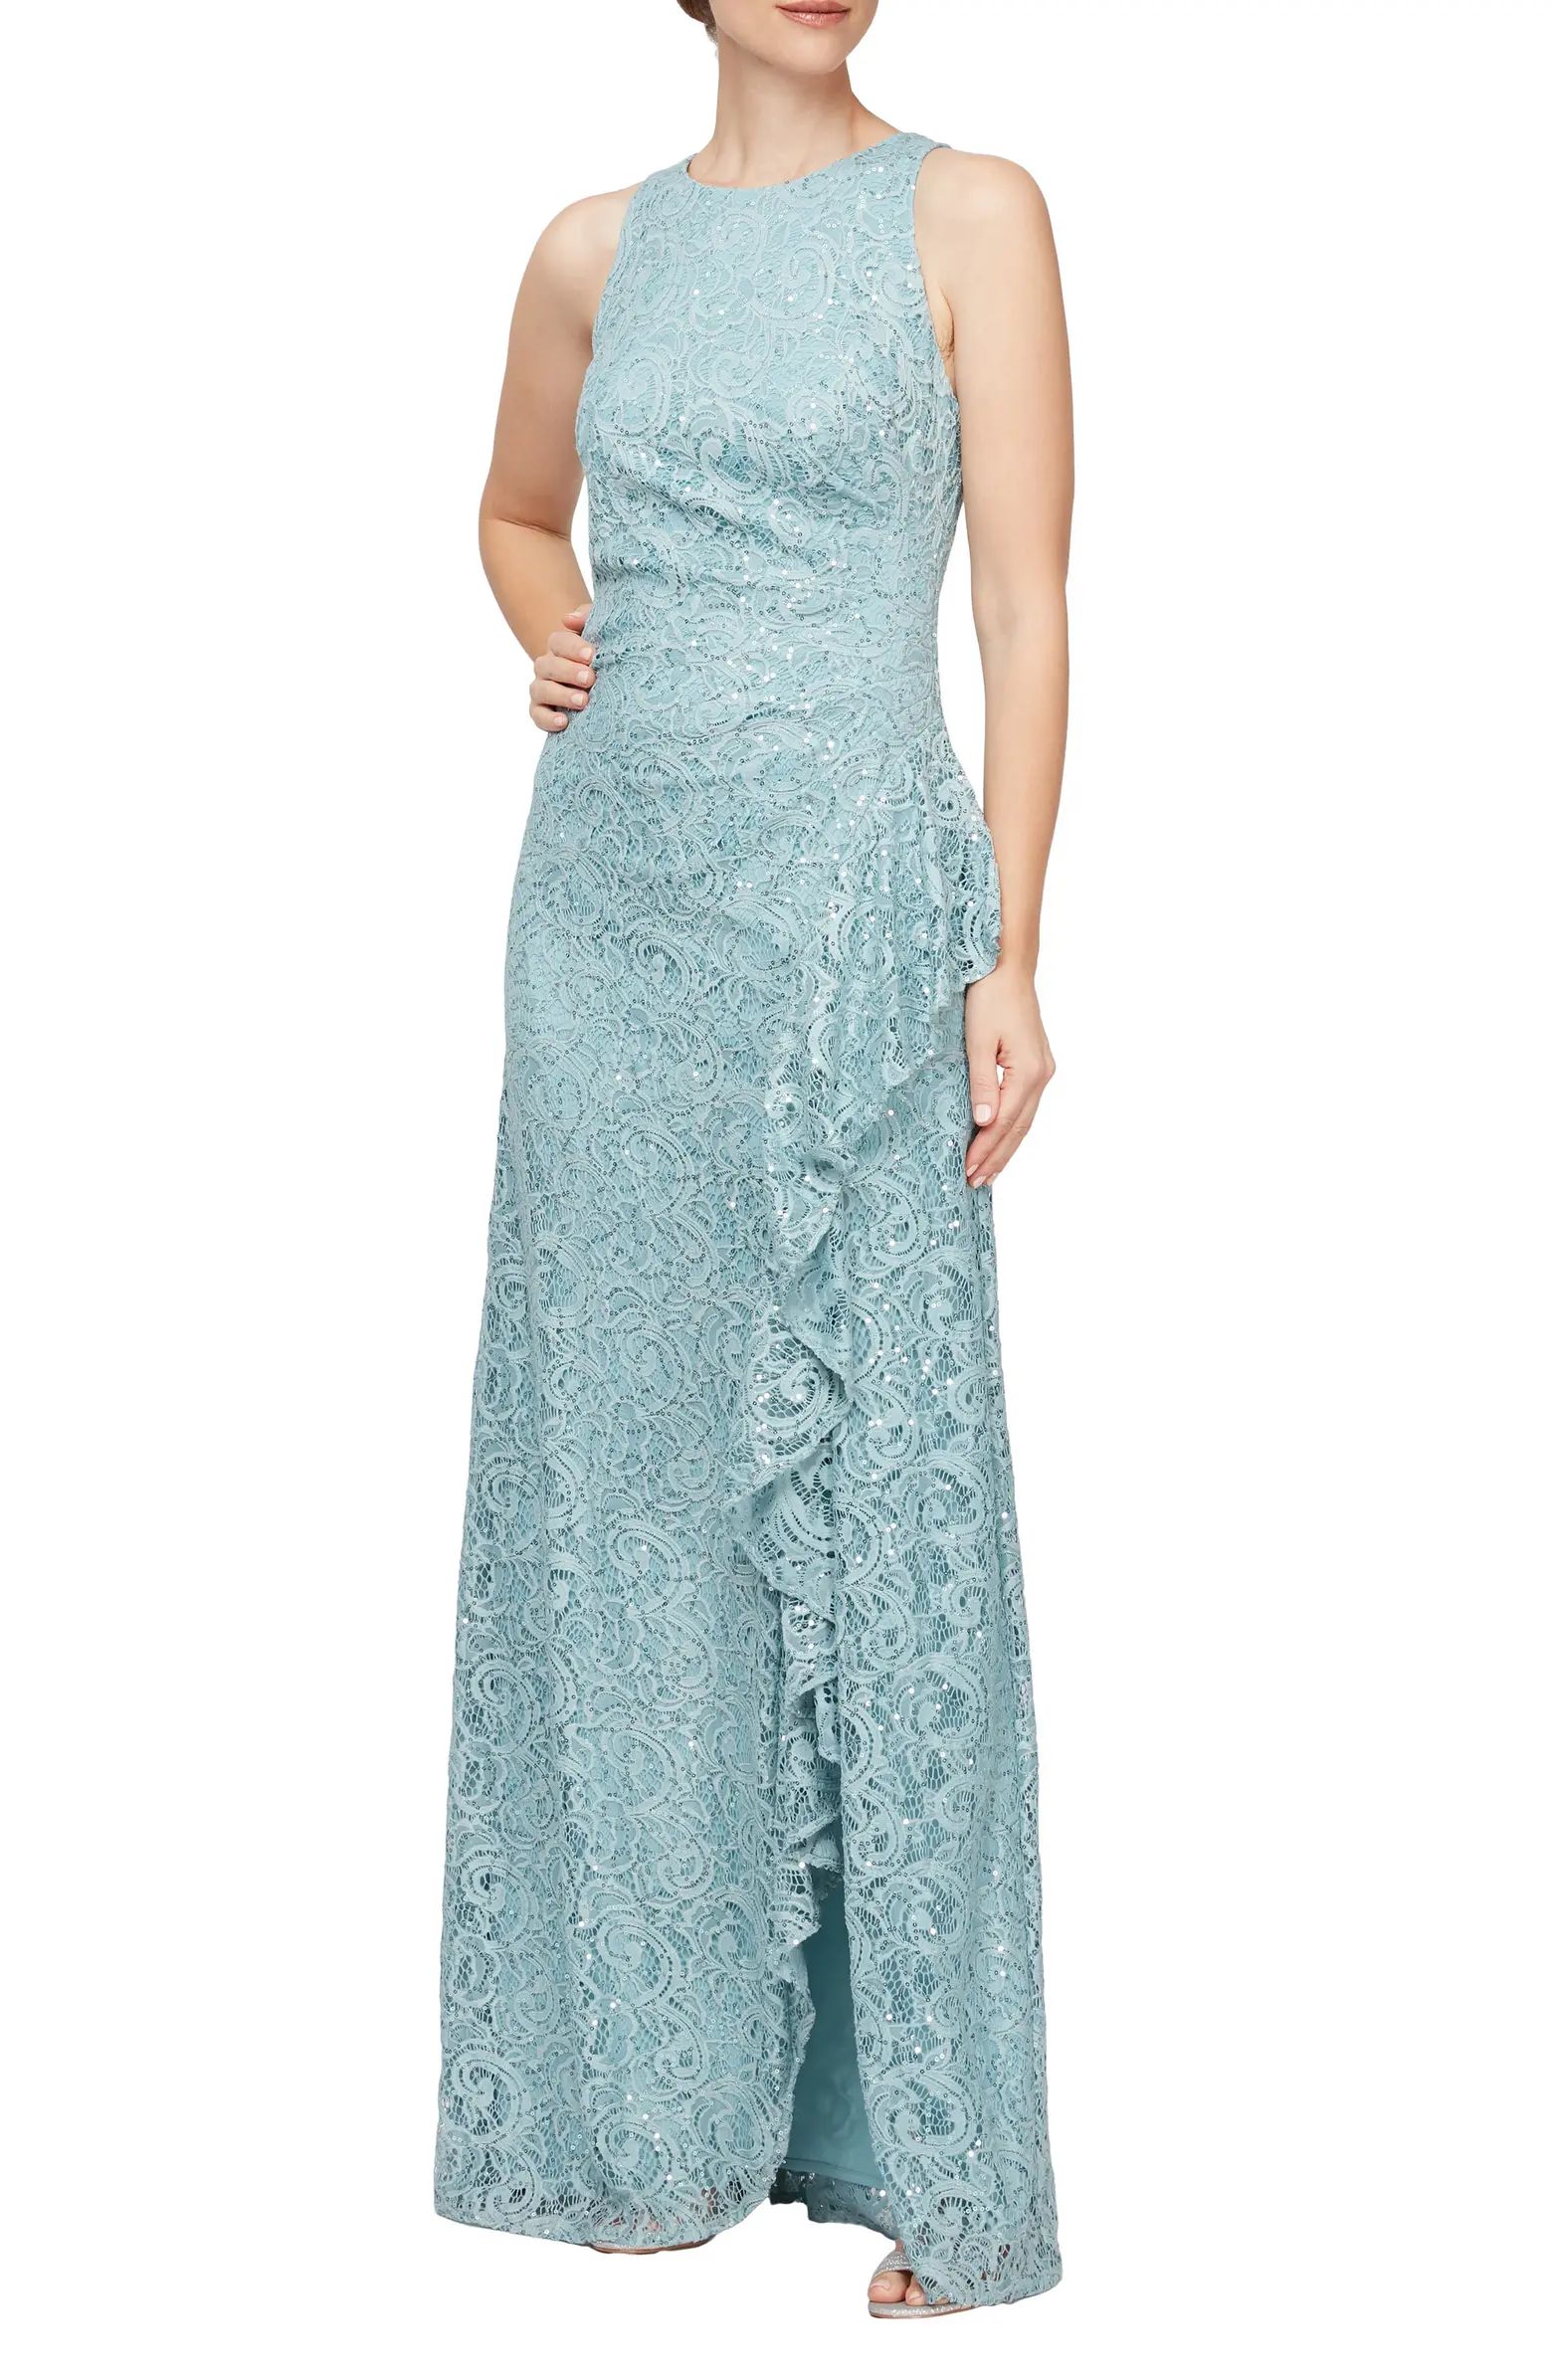 Ruffle Sequin Lace Gown | Nordstrom